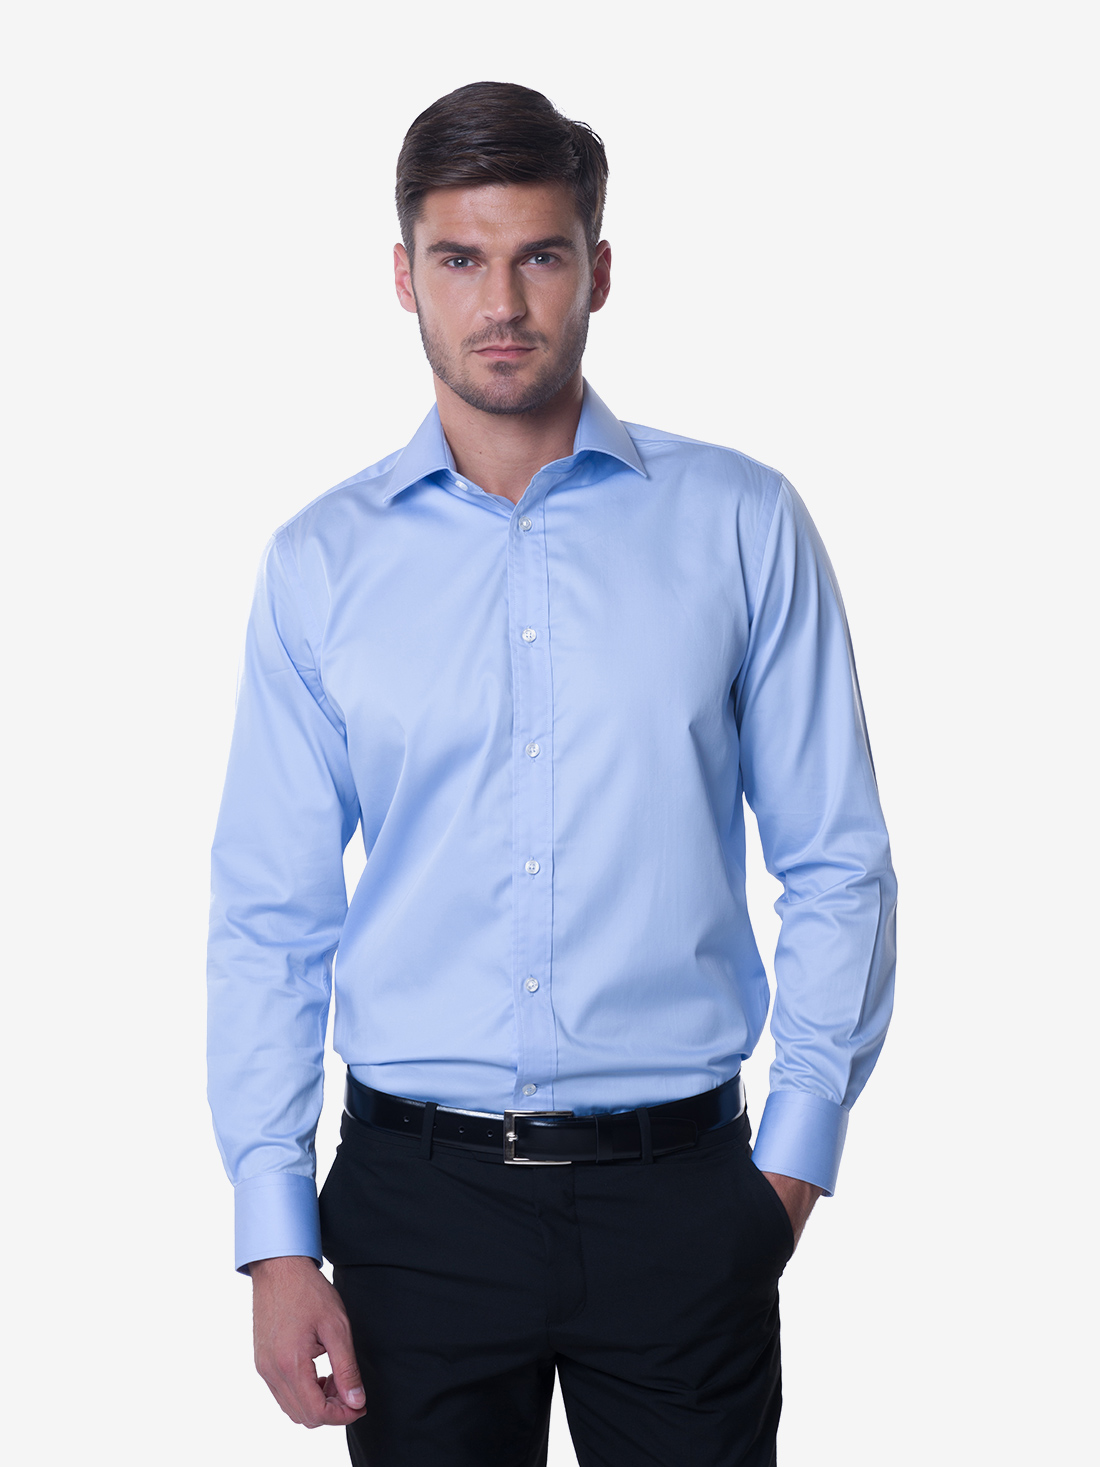 Tailored Fit Light Blue Twill Easy Care Cotton Shirt - Kal Jacobs